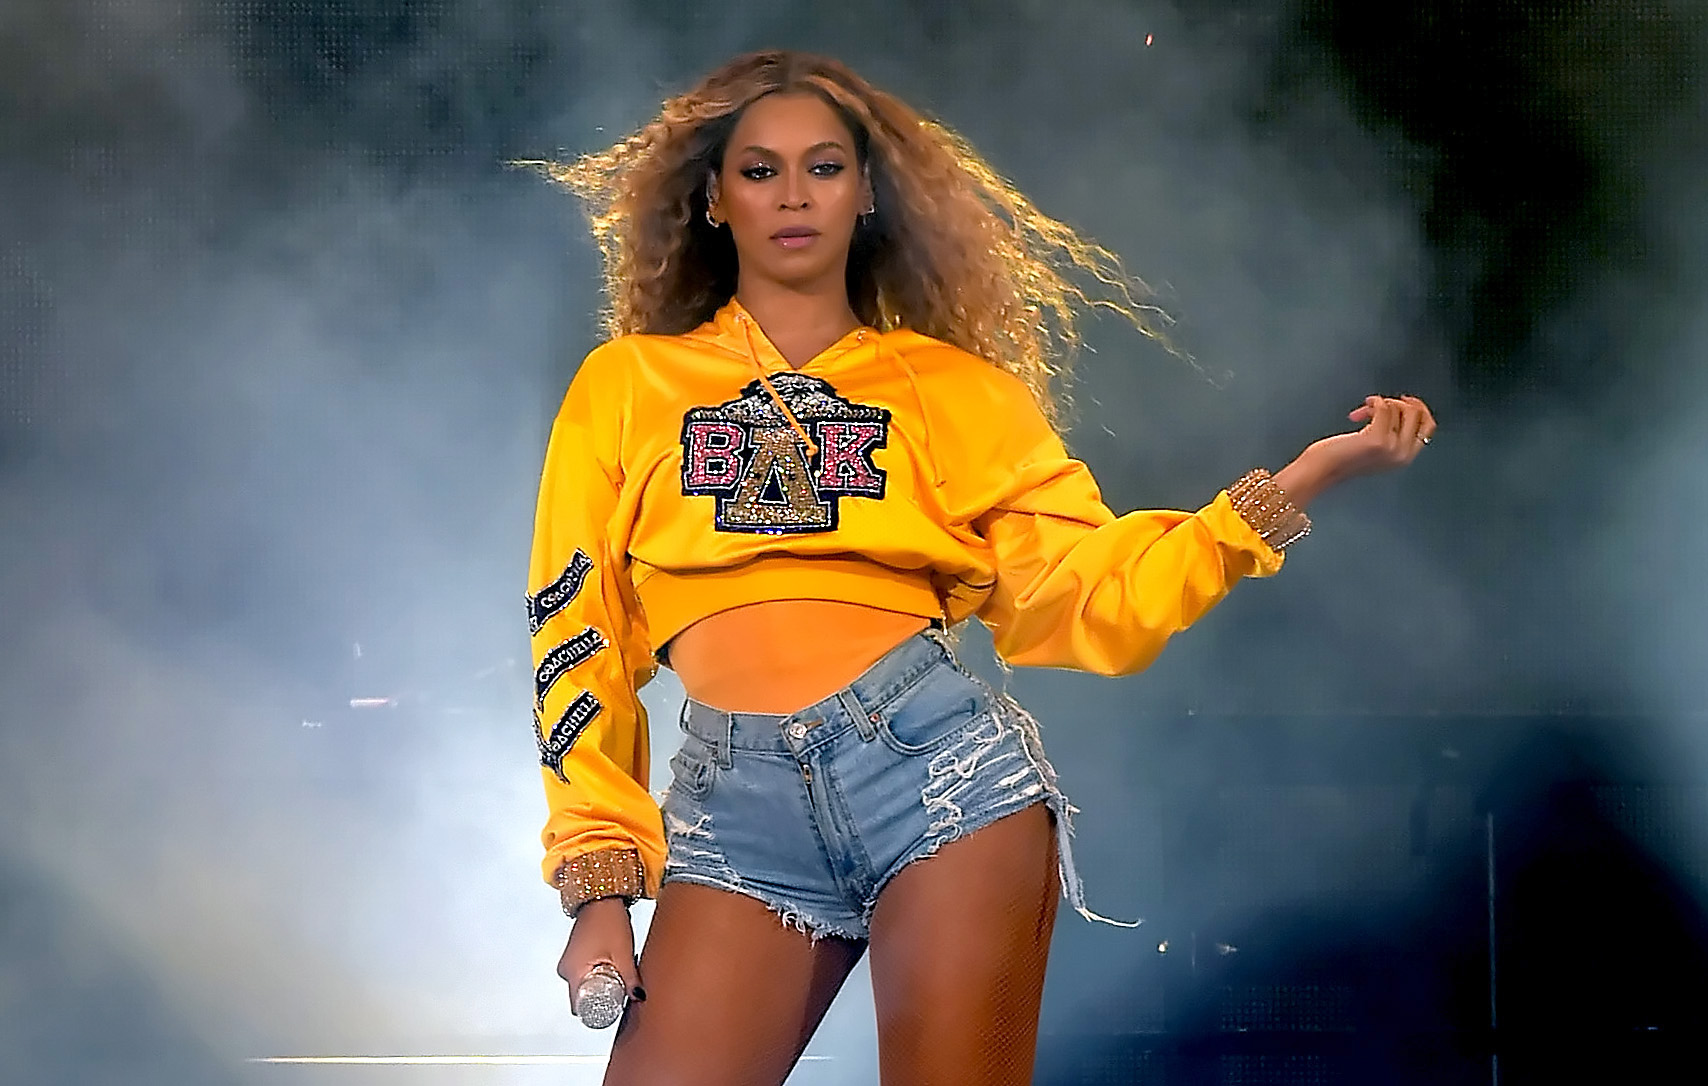 PHOTO: Beyonce Knowles performs onstage during 2018 Coachella Valley Music And Arts Festival Weekend 1 at the Empire Polo Field, April 14, 2018, in Indio, Calif.